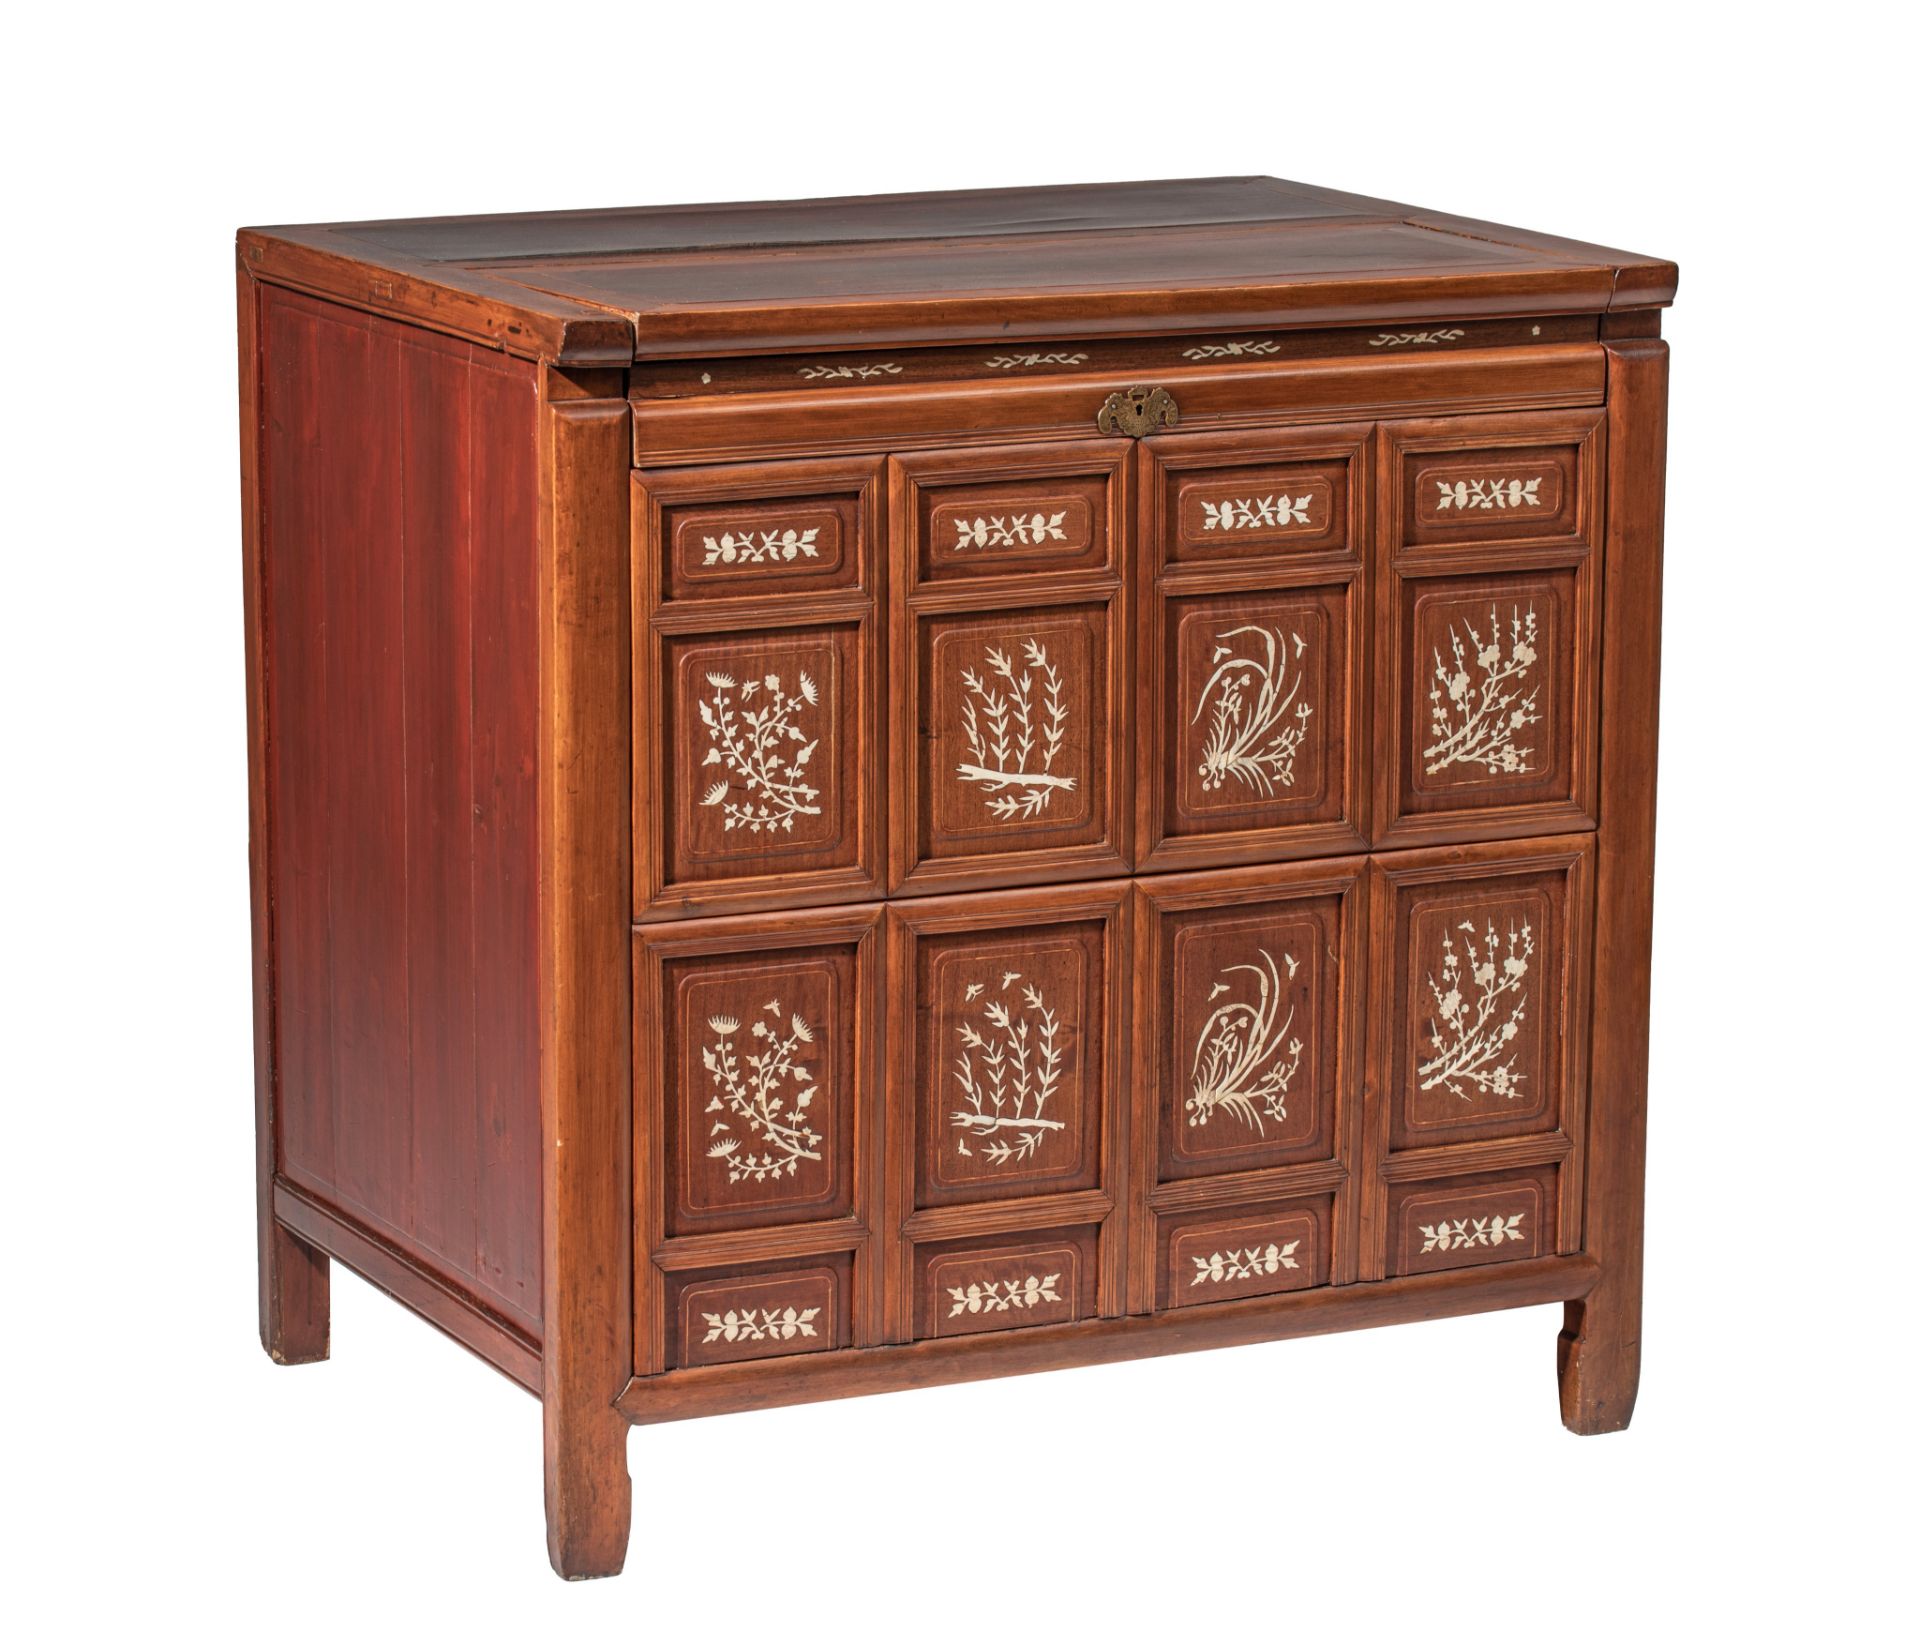 A Chinese assembled hardwood chest, 95 x 67 - H 95 cm